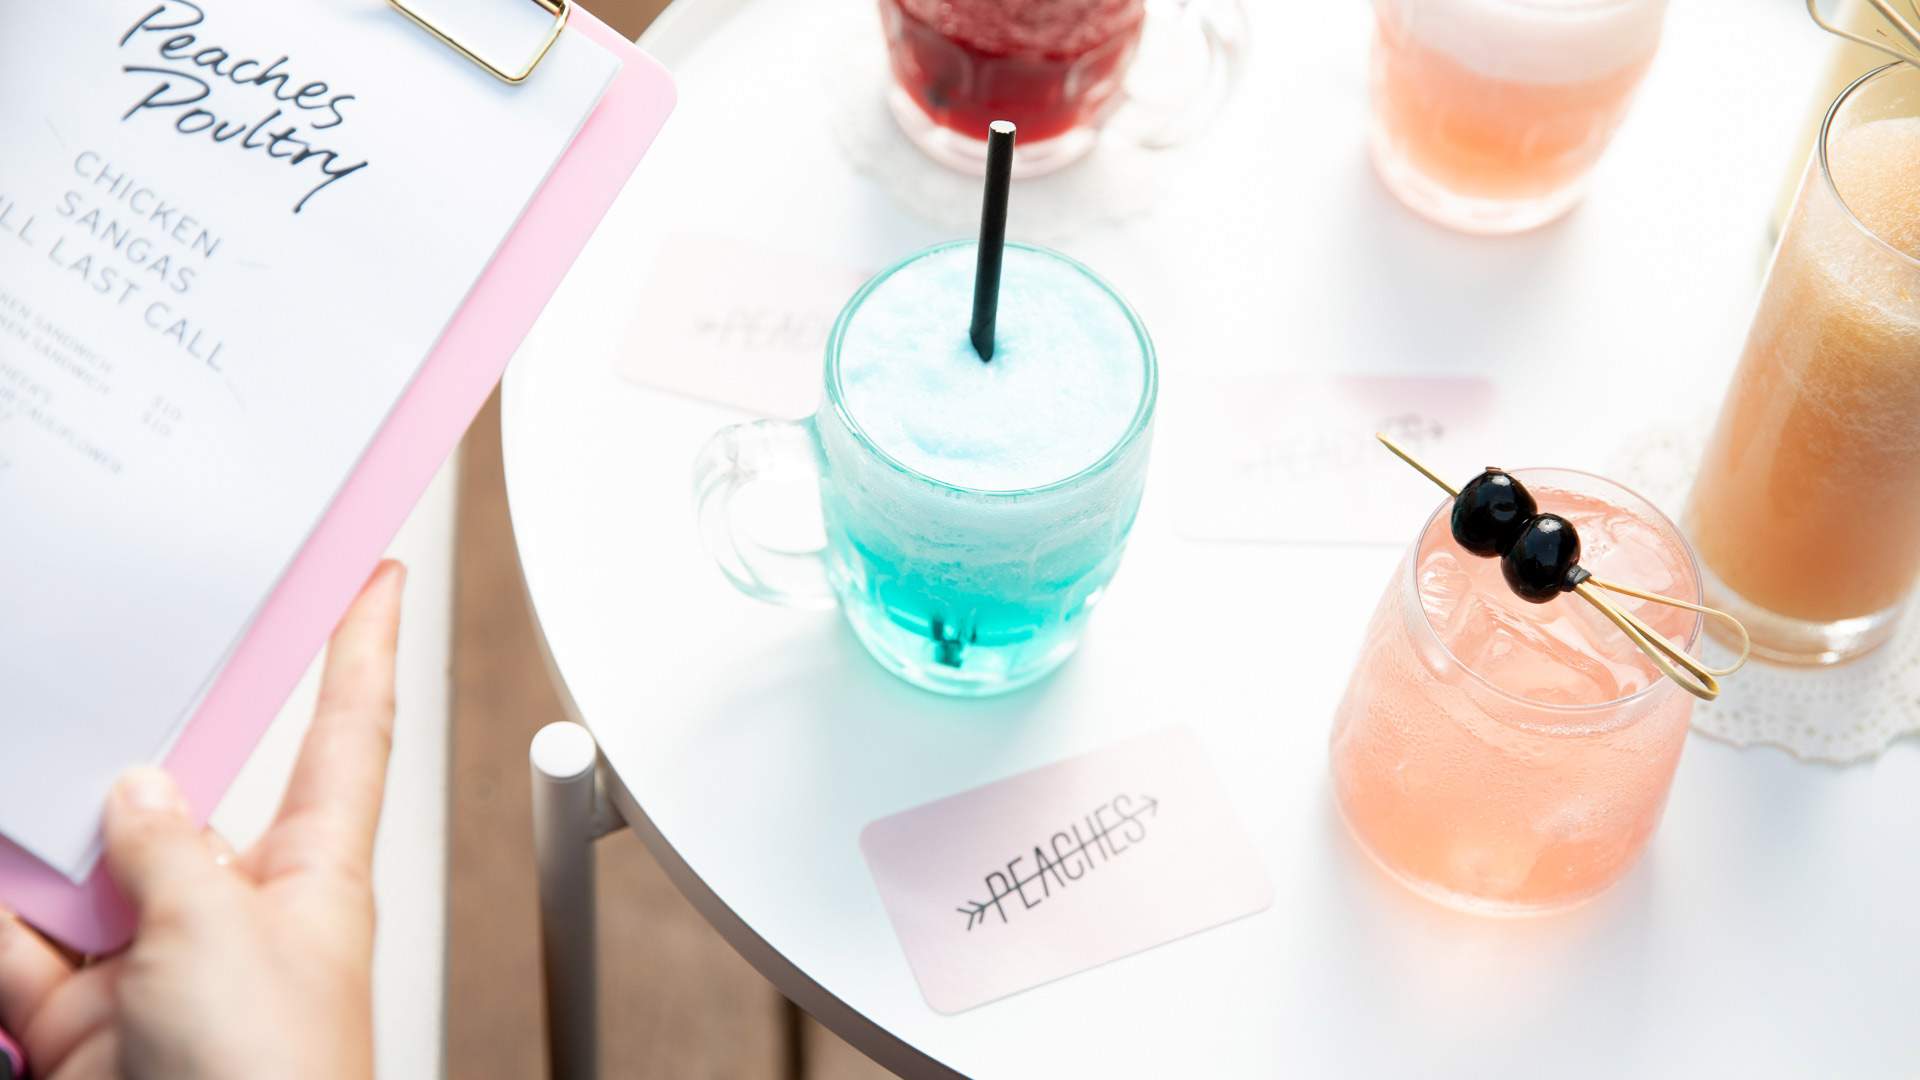 Peaches Is Melbourne CBD's New Two-Level Bar and Rooftop from the Dexter Team